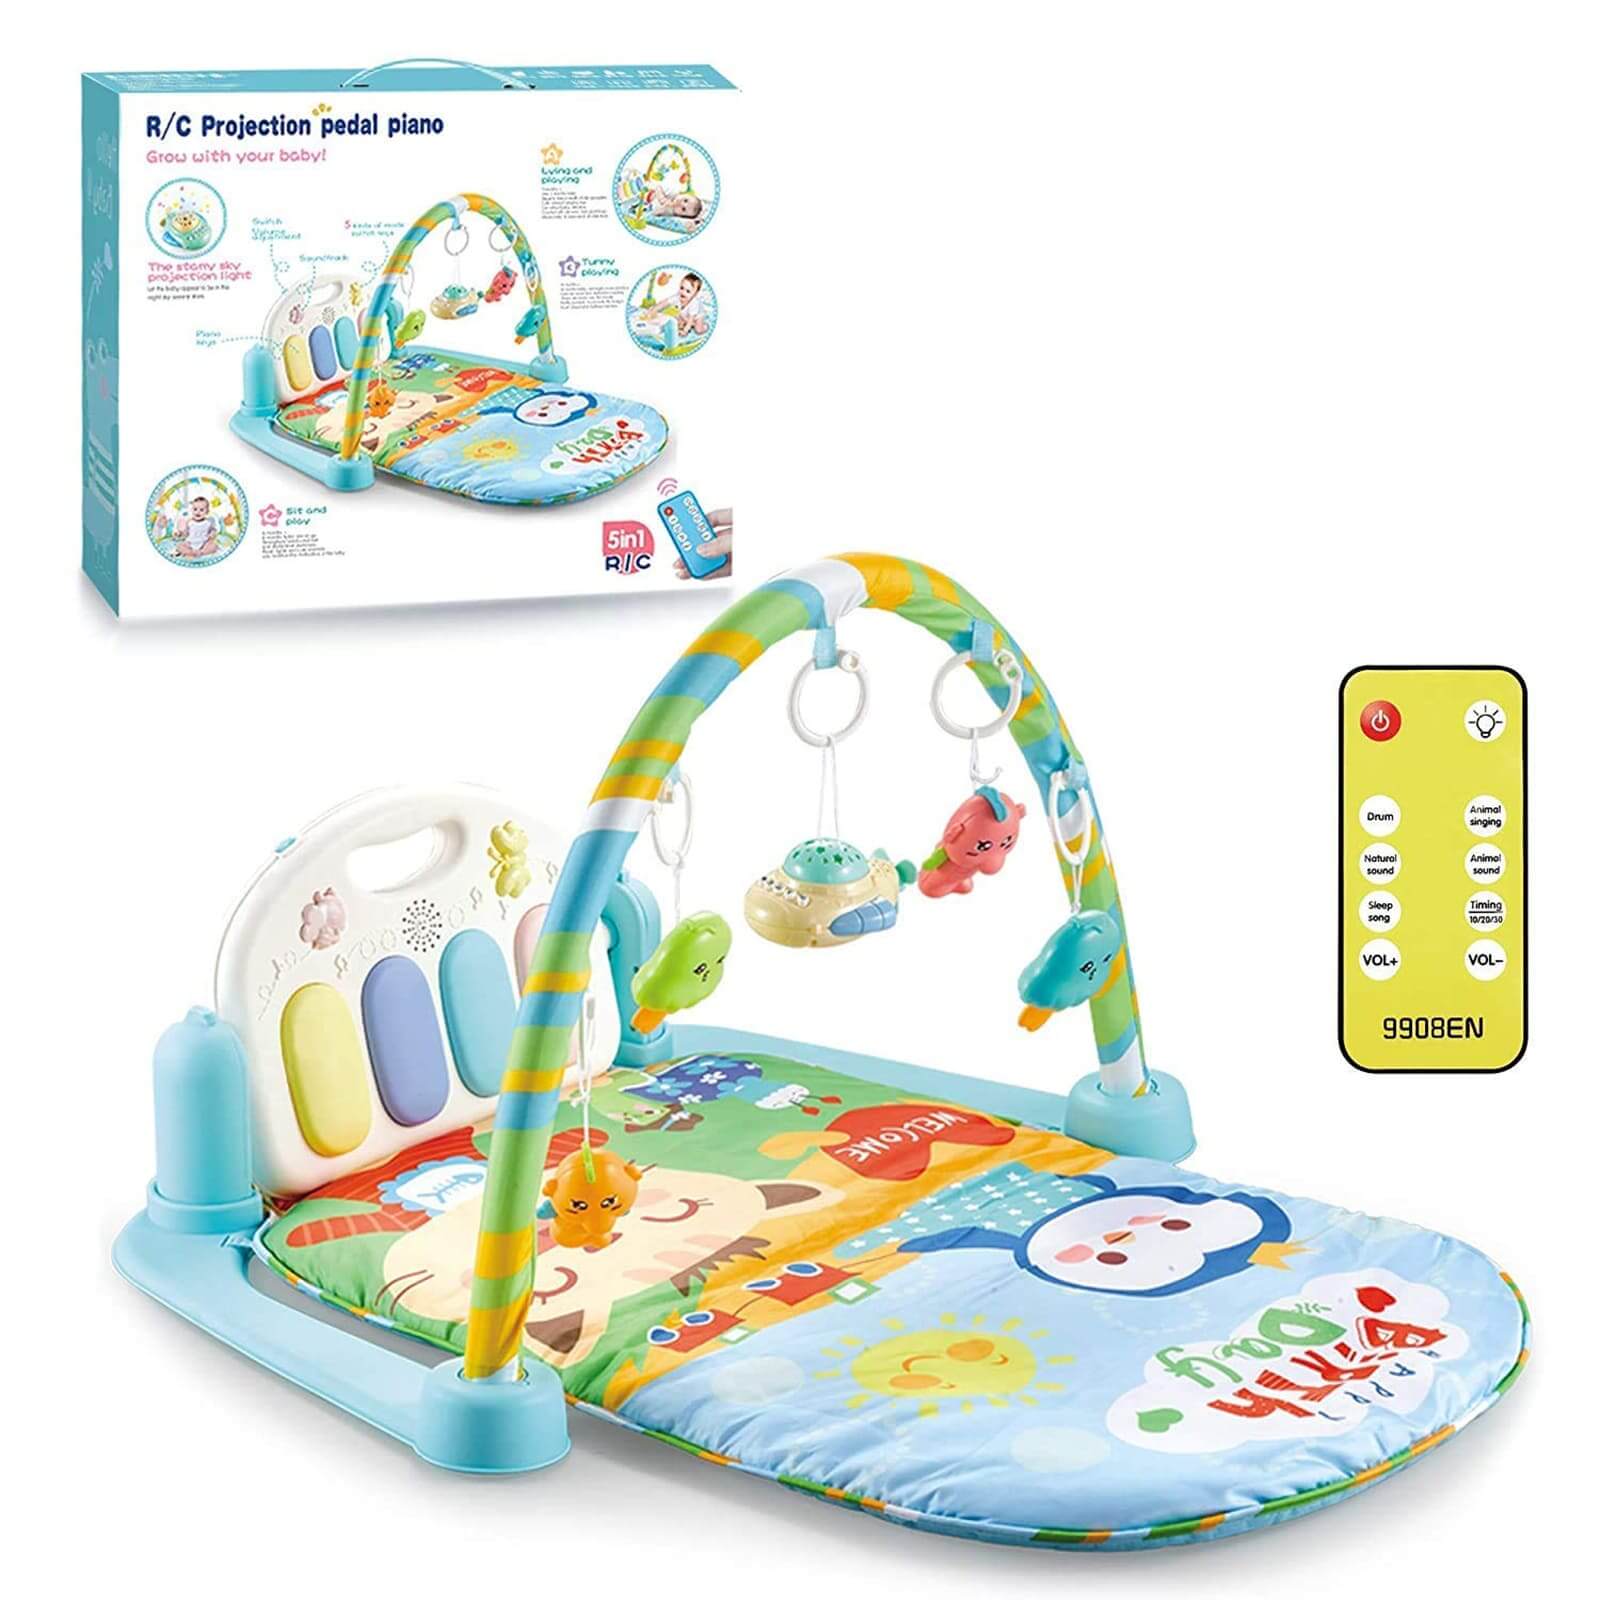 5 in 1 RC projection pedal piano play gym for babies